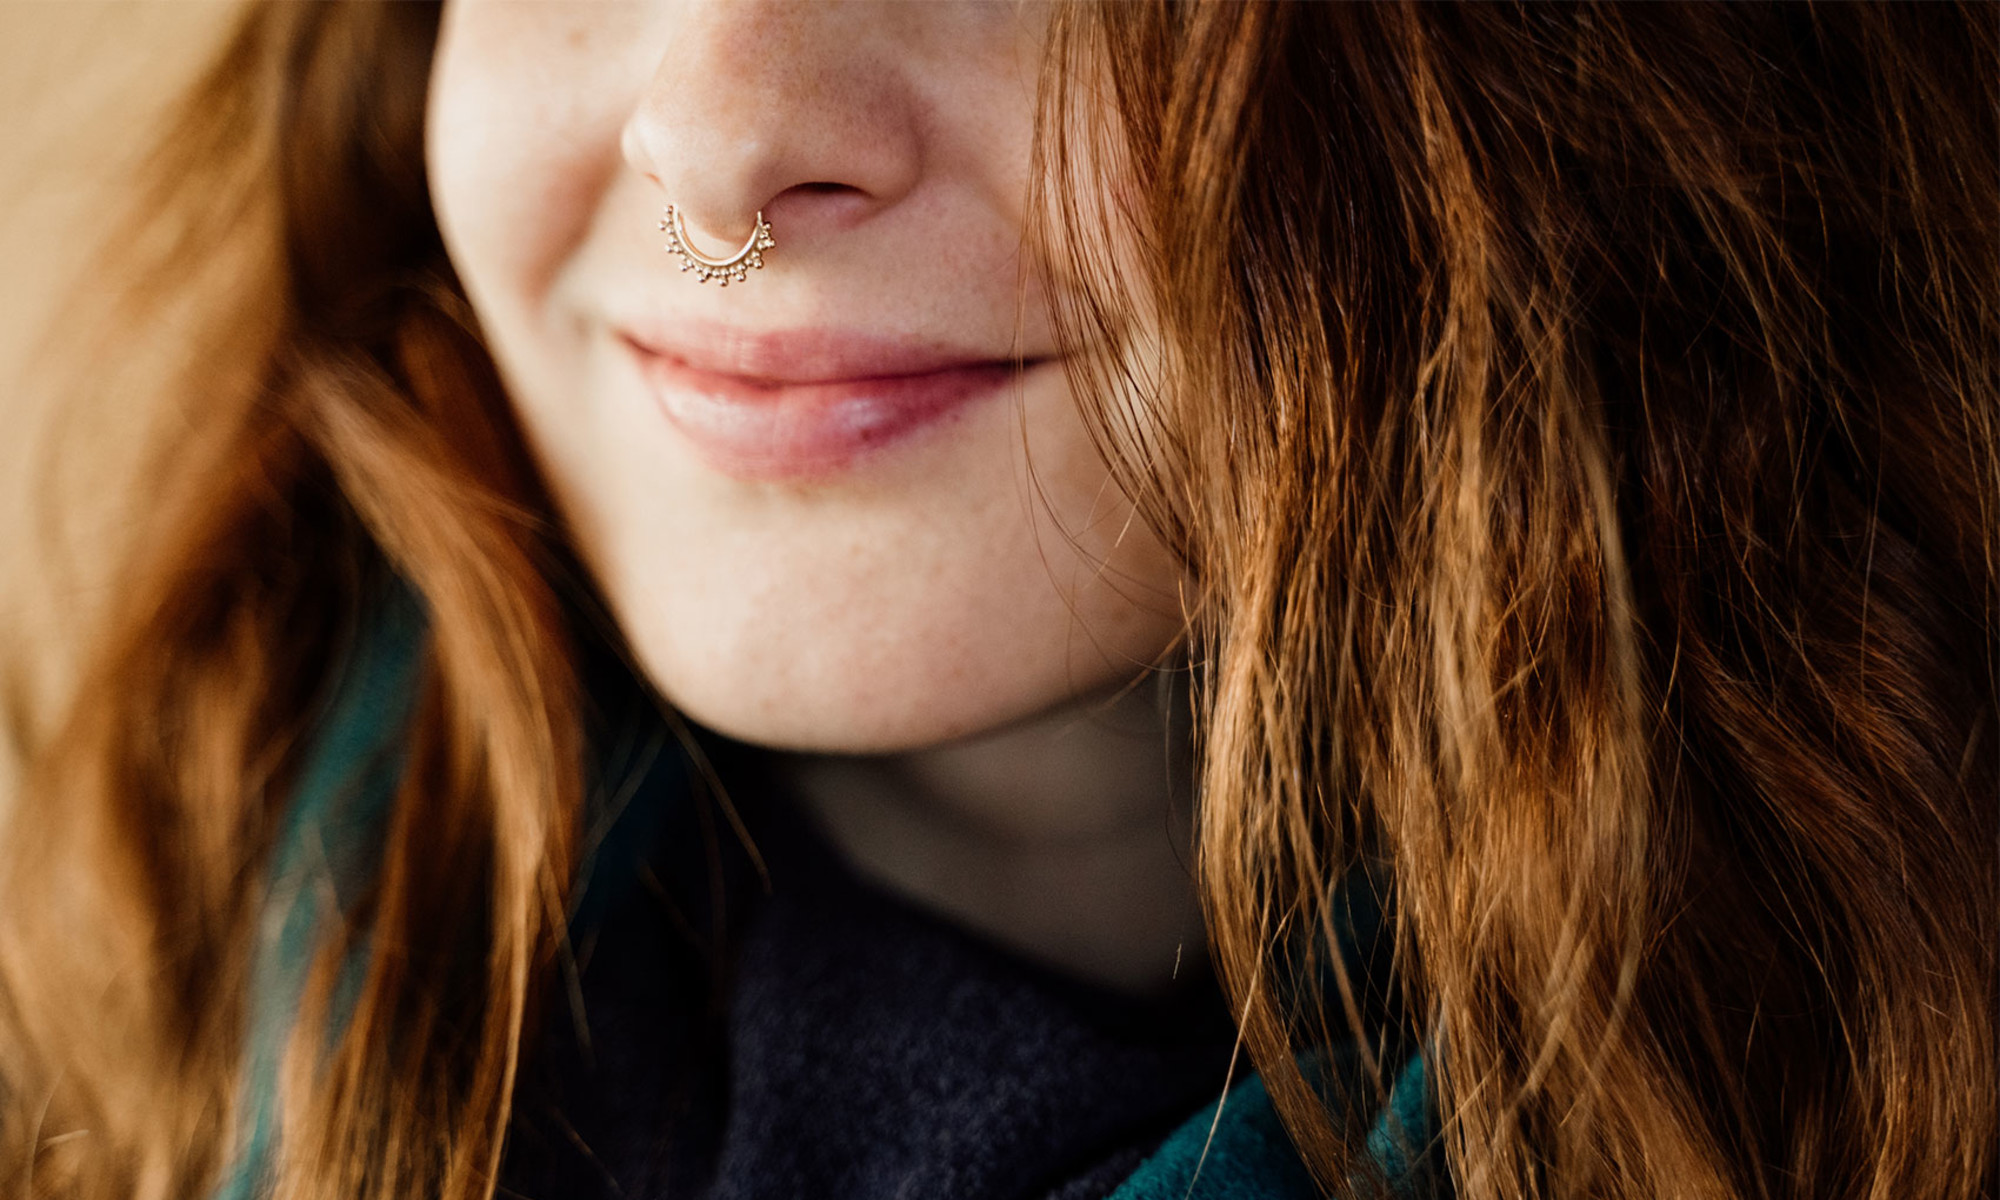 Piercing bump vs. keloid: How to tell the difference and what to do